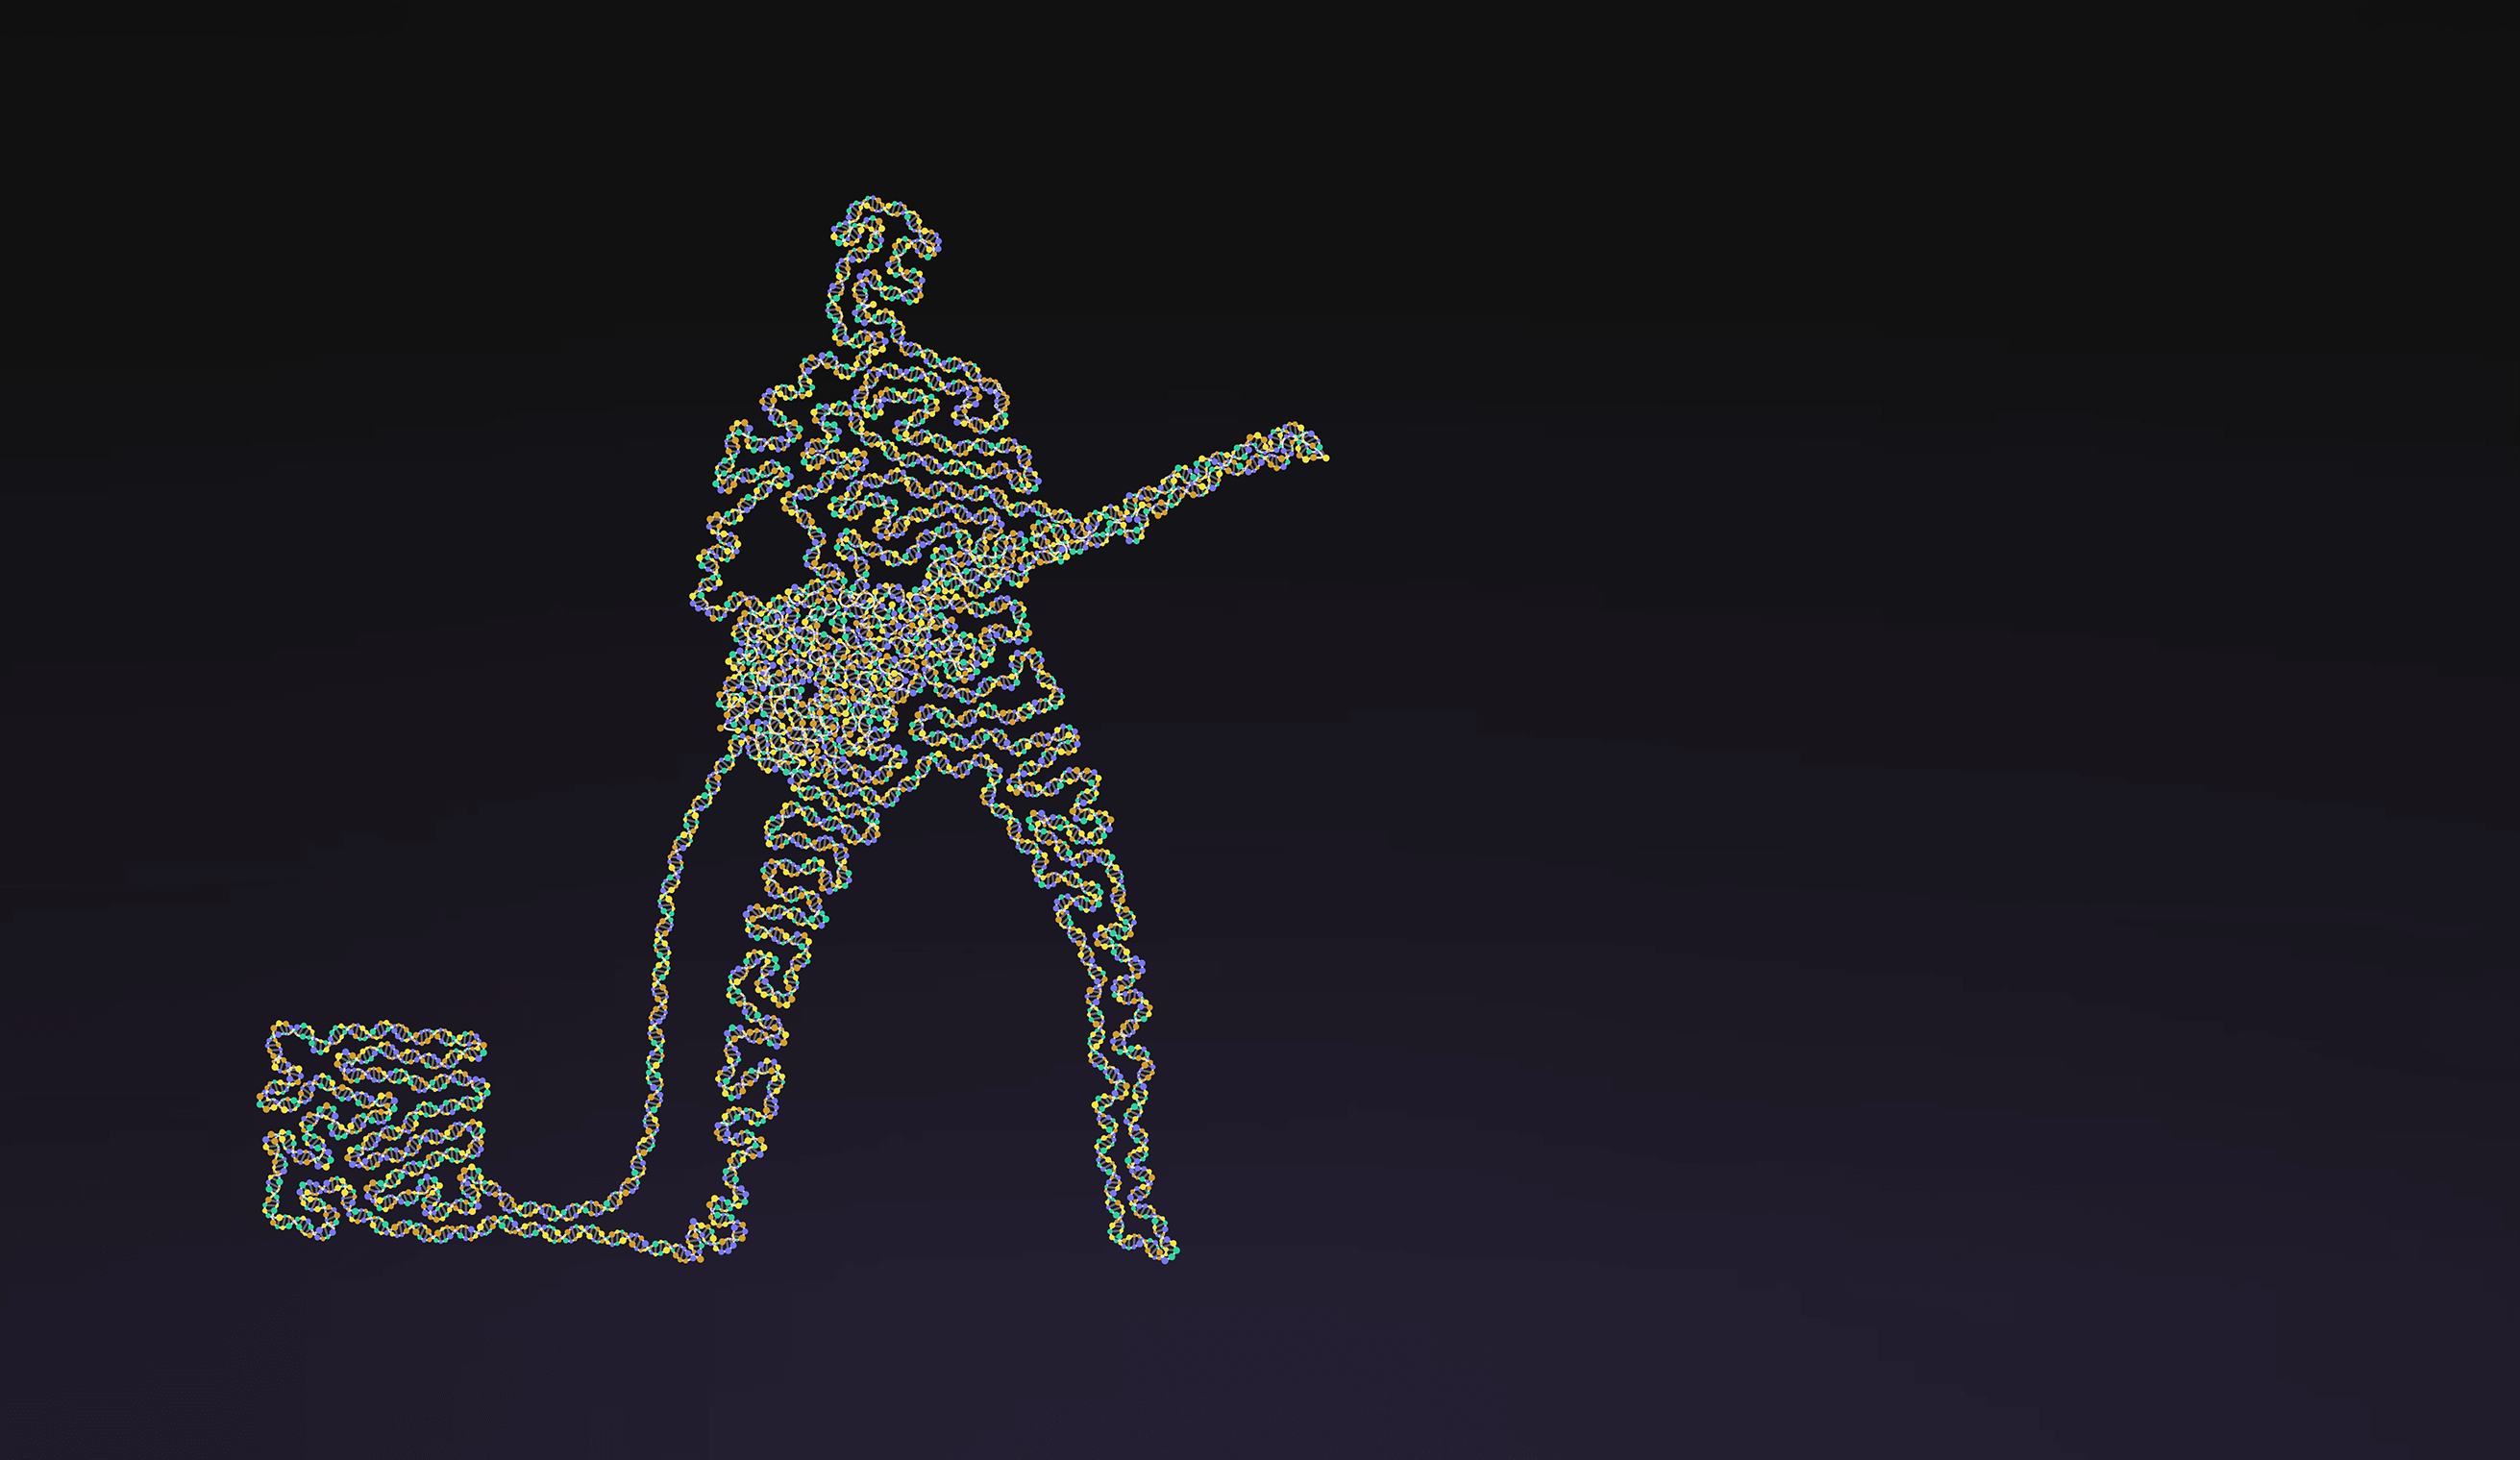 Cartoon of DNA coiled up and bunched up to form the silhouette of a person playing electric guitar